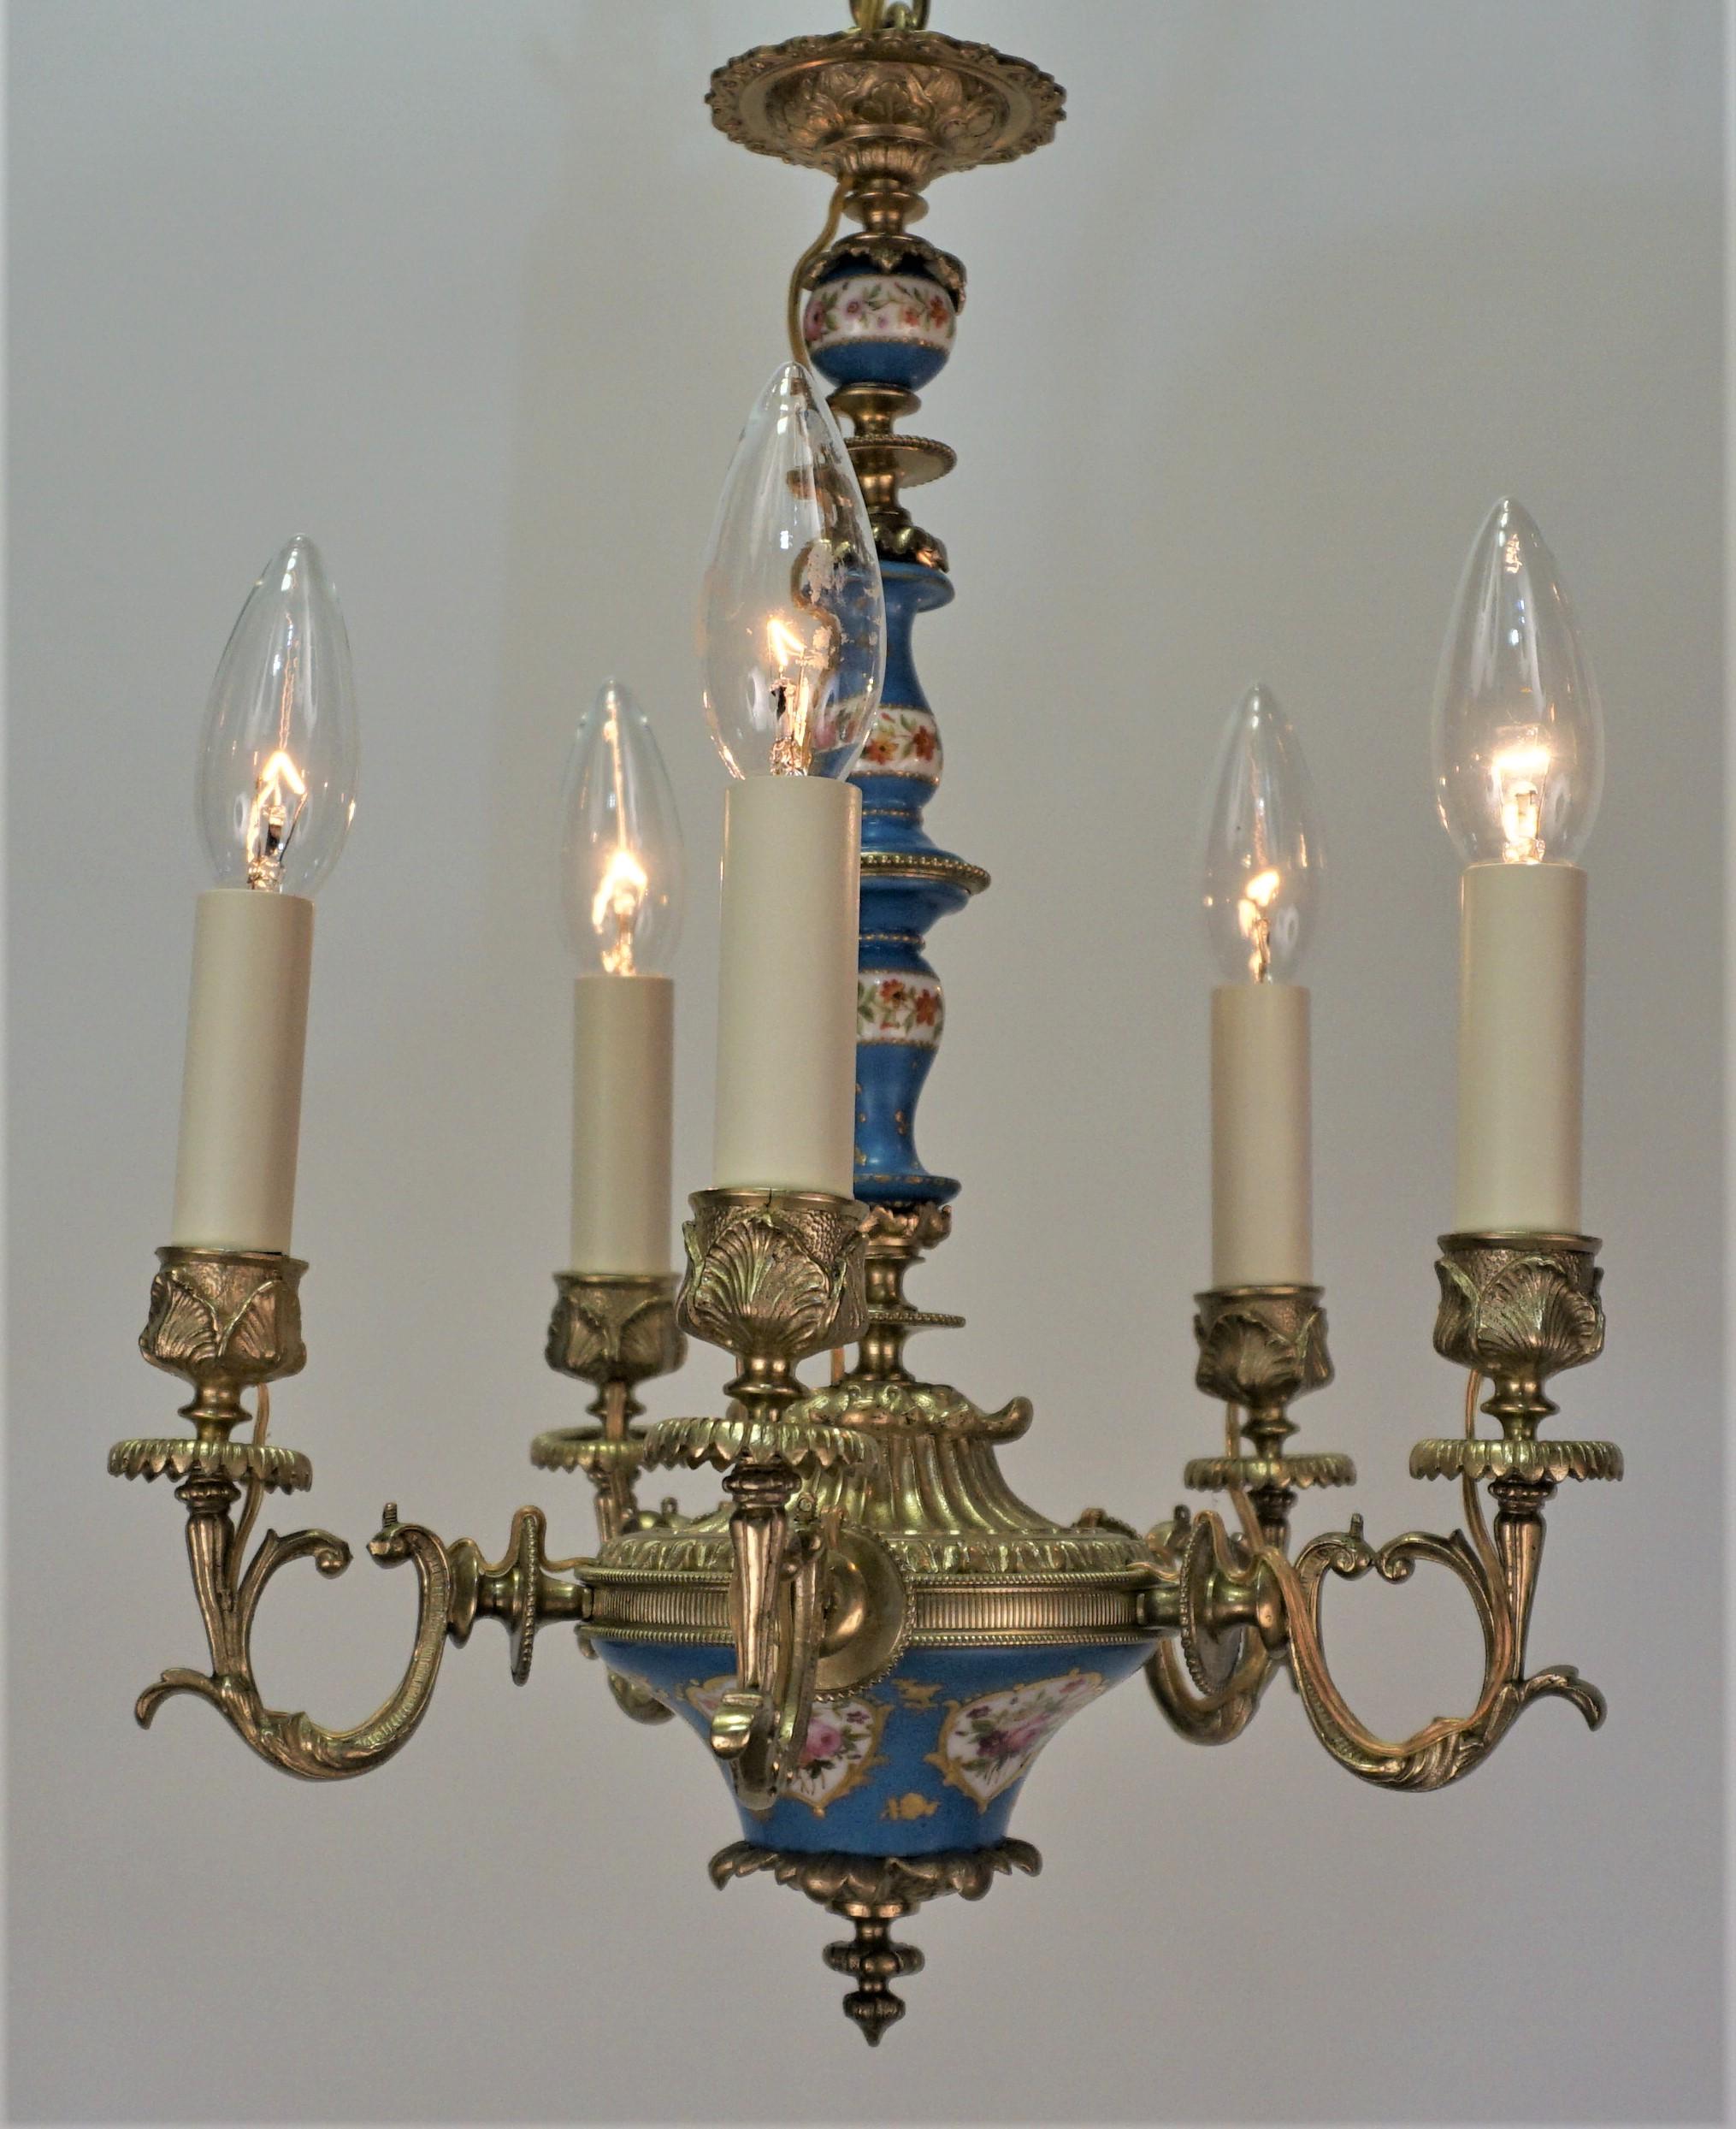 Electrified 19th century Sèvres Porcelain and bronze chandelier.
Minimum height fully installed is 19